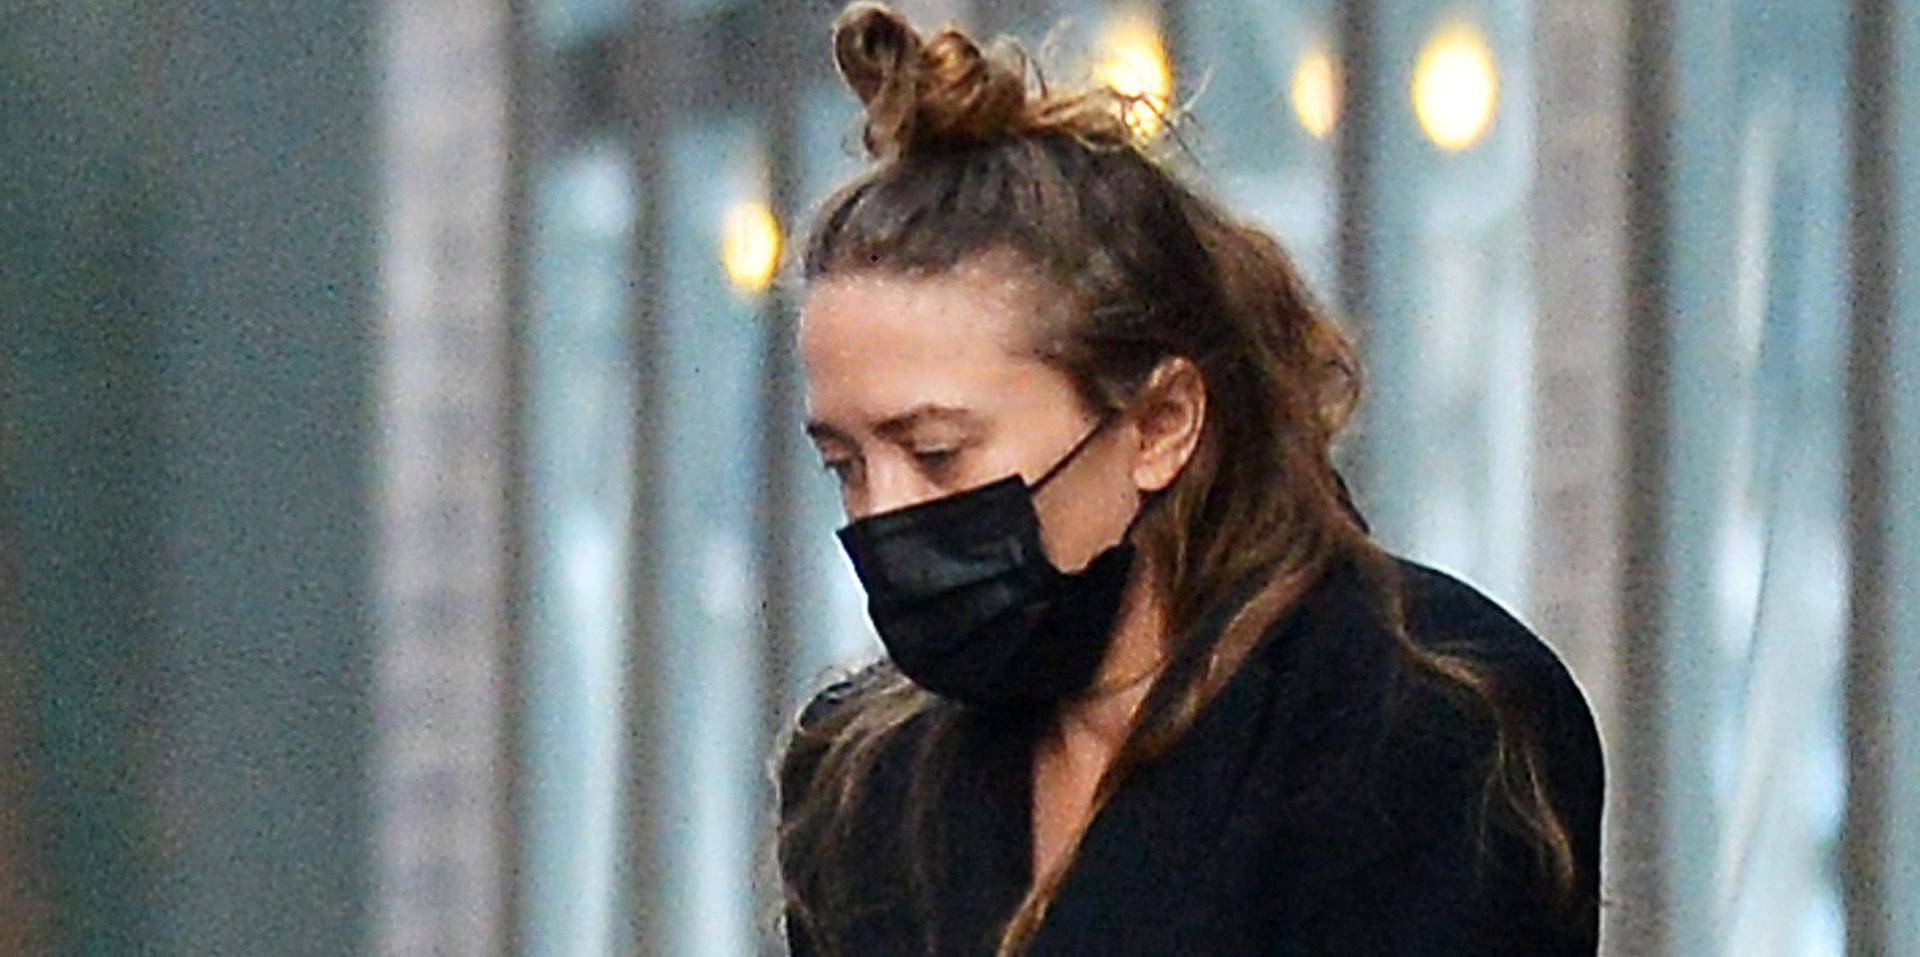 EXCLUSIVE: Mary-Kate Olsen is Spotted Leaving Her Office in New York City.